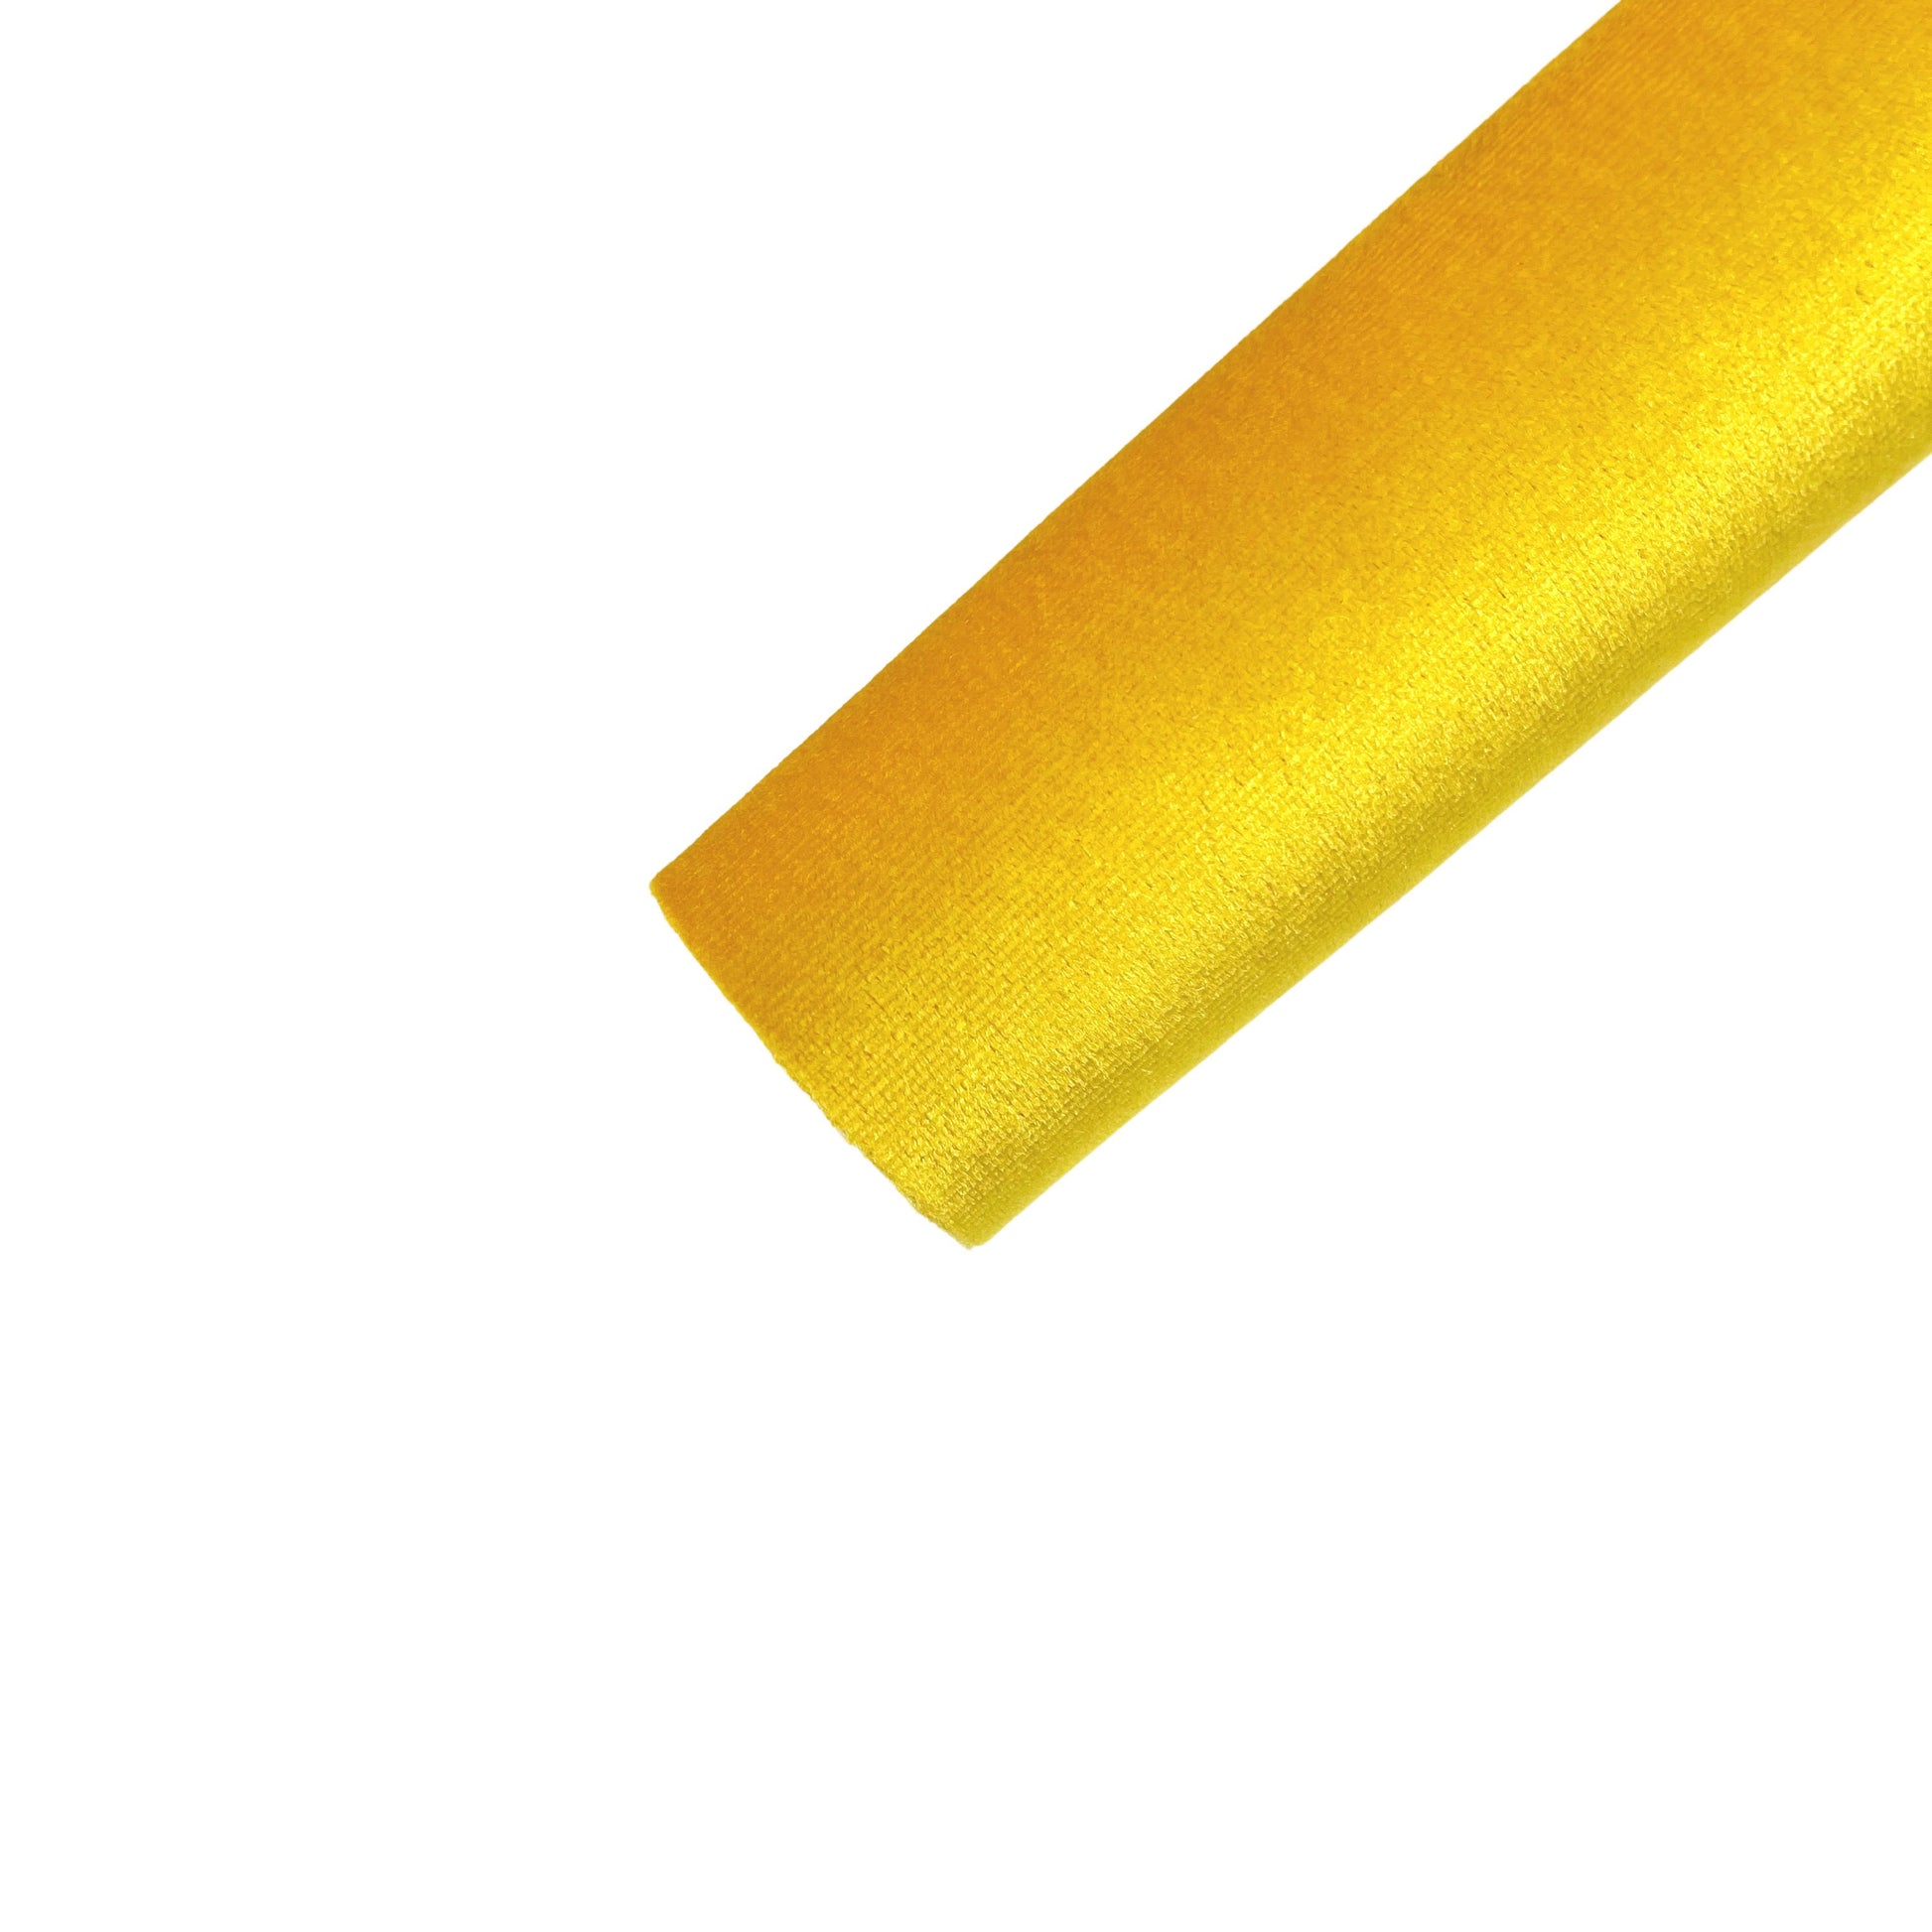 Rolled solid colored velvet sheet in bright sunny yellow.